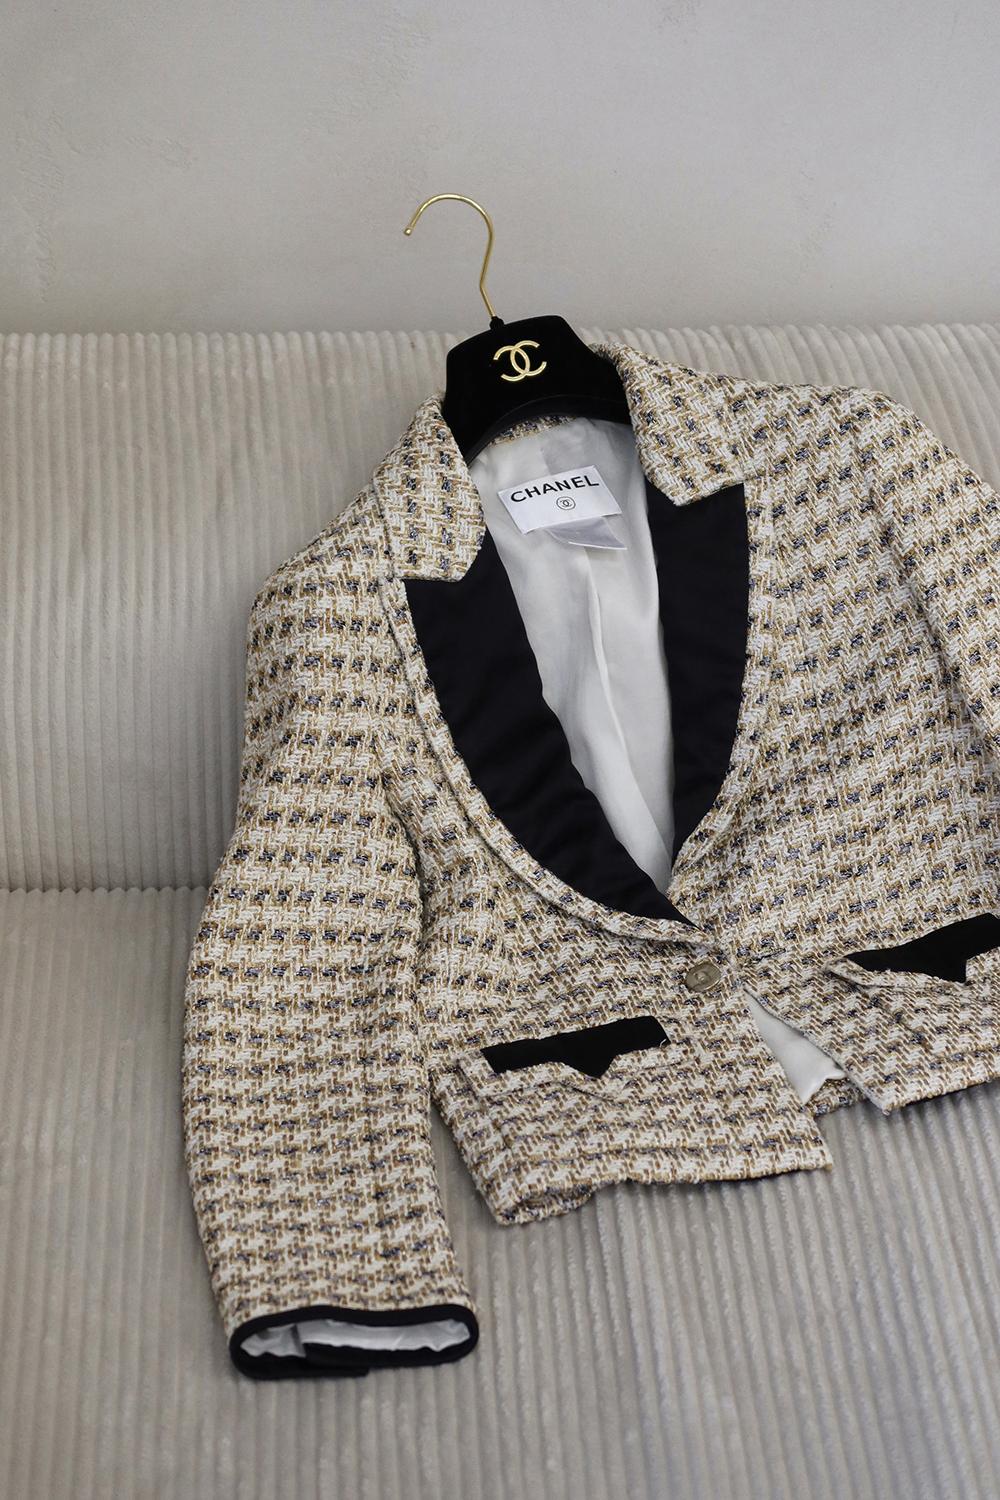 Chanel beige and metallic tweed jacket with contrast black lapels.
- CC logo gold-tone buttons at front and cuffs
- tonal silk lining
Size mark 38 FR. Condition: pristine, only tried once.